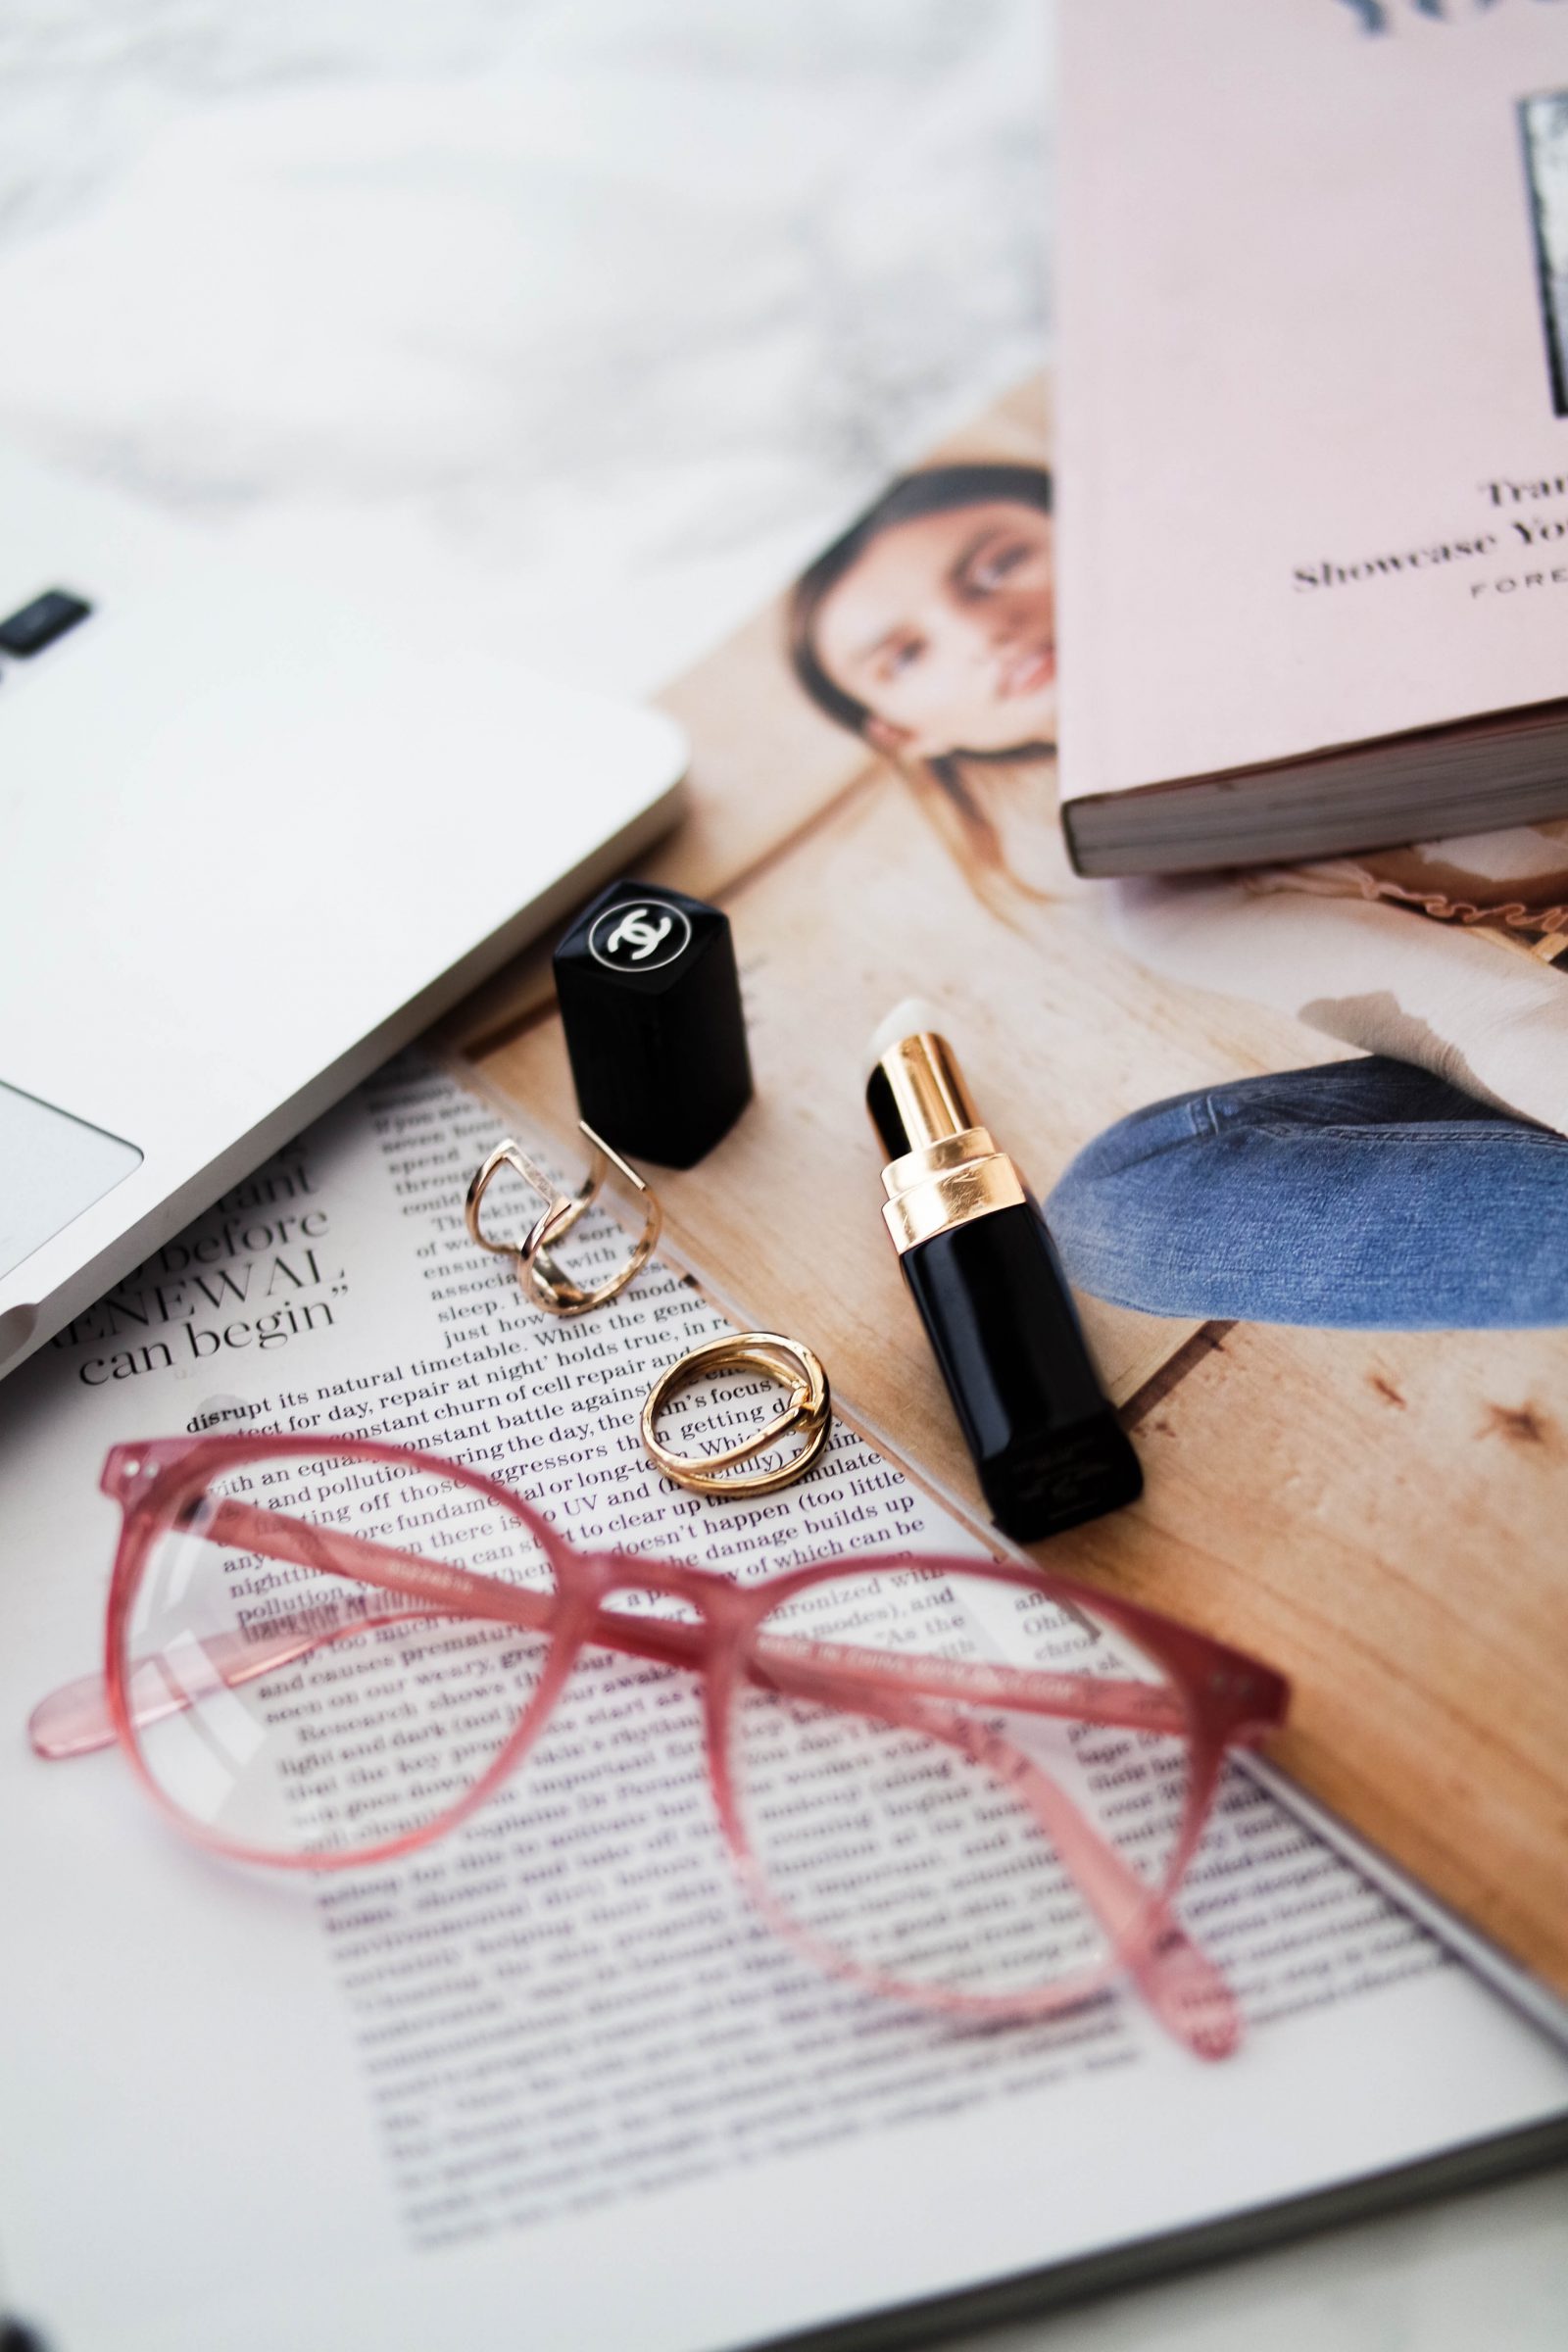 How To Start A Blog Chanel Lipbalm